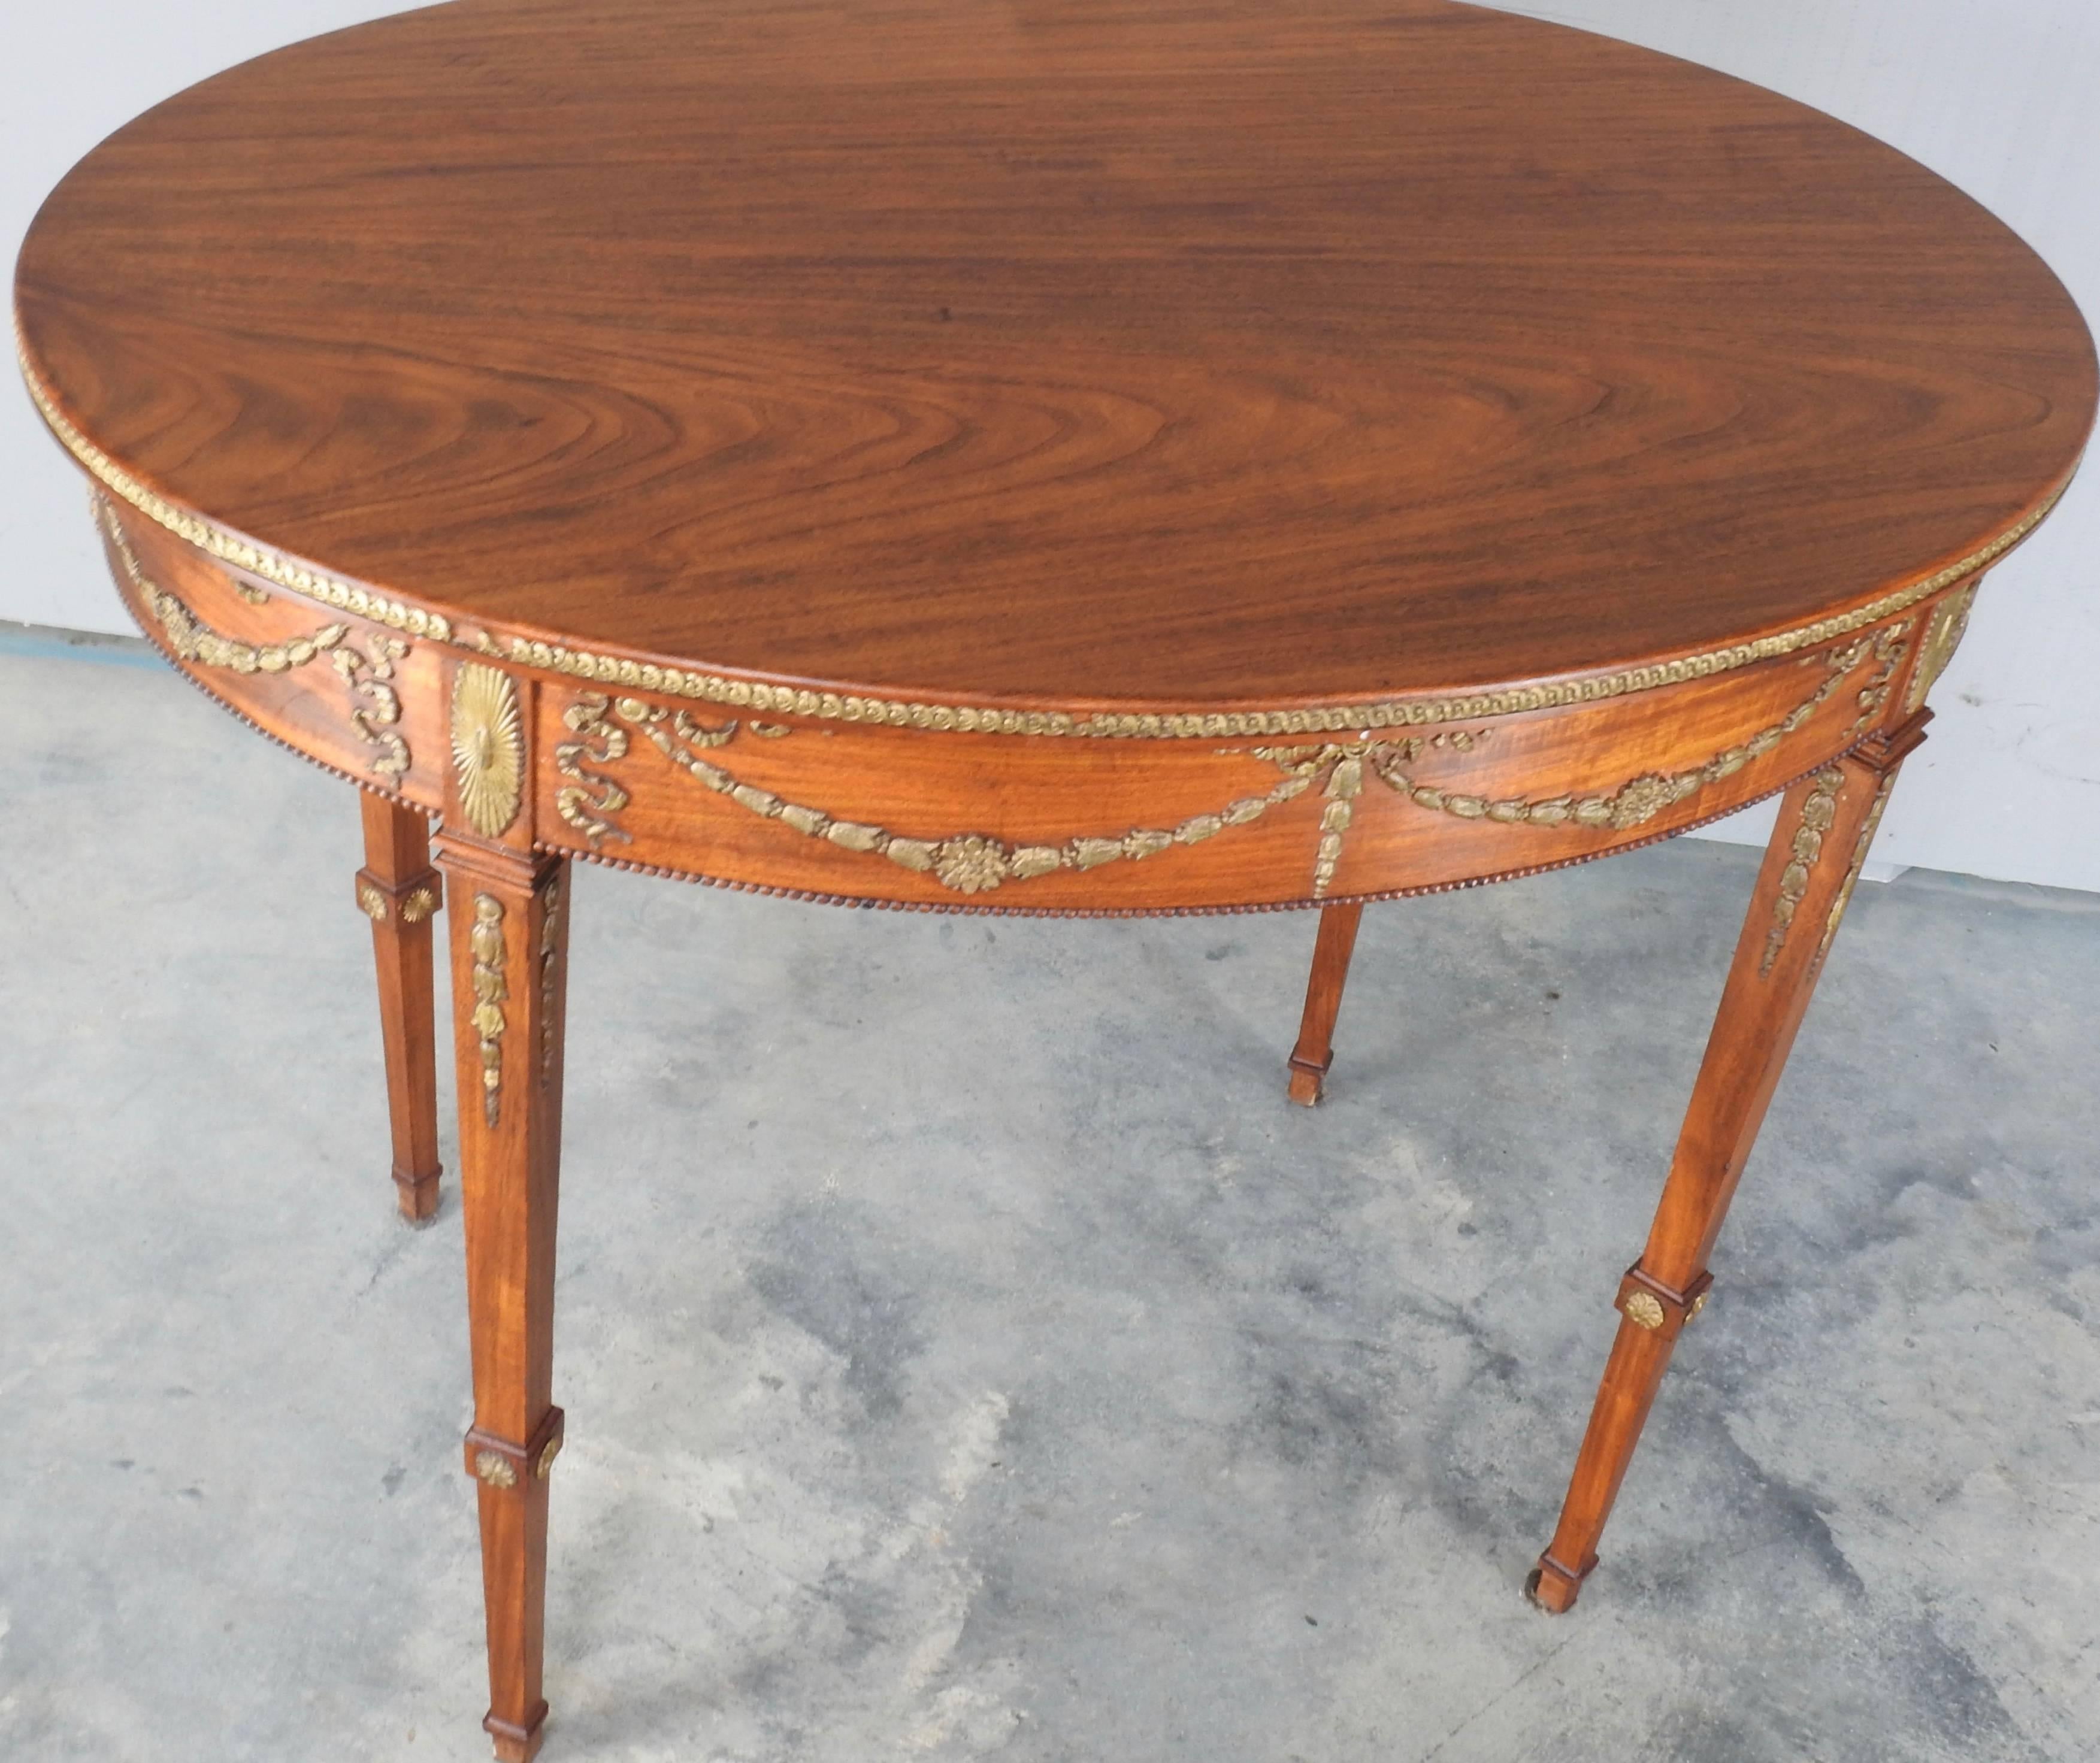 French Oval Table with Hand Carved Ormolu In Fair Condition For Sale In Cookeville, TN